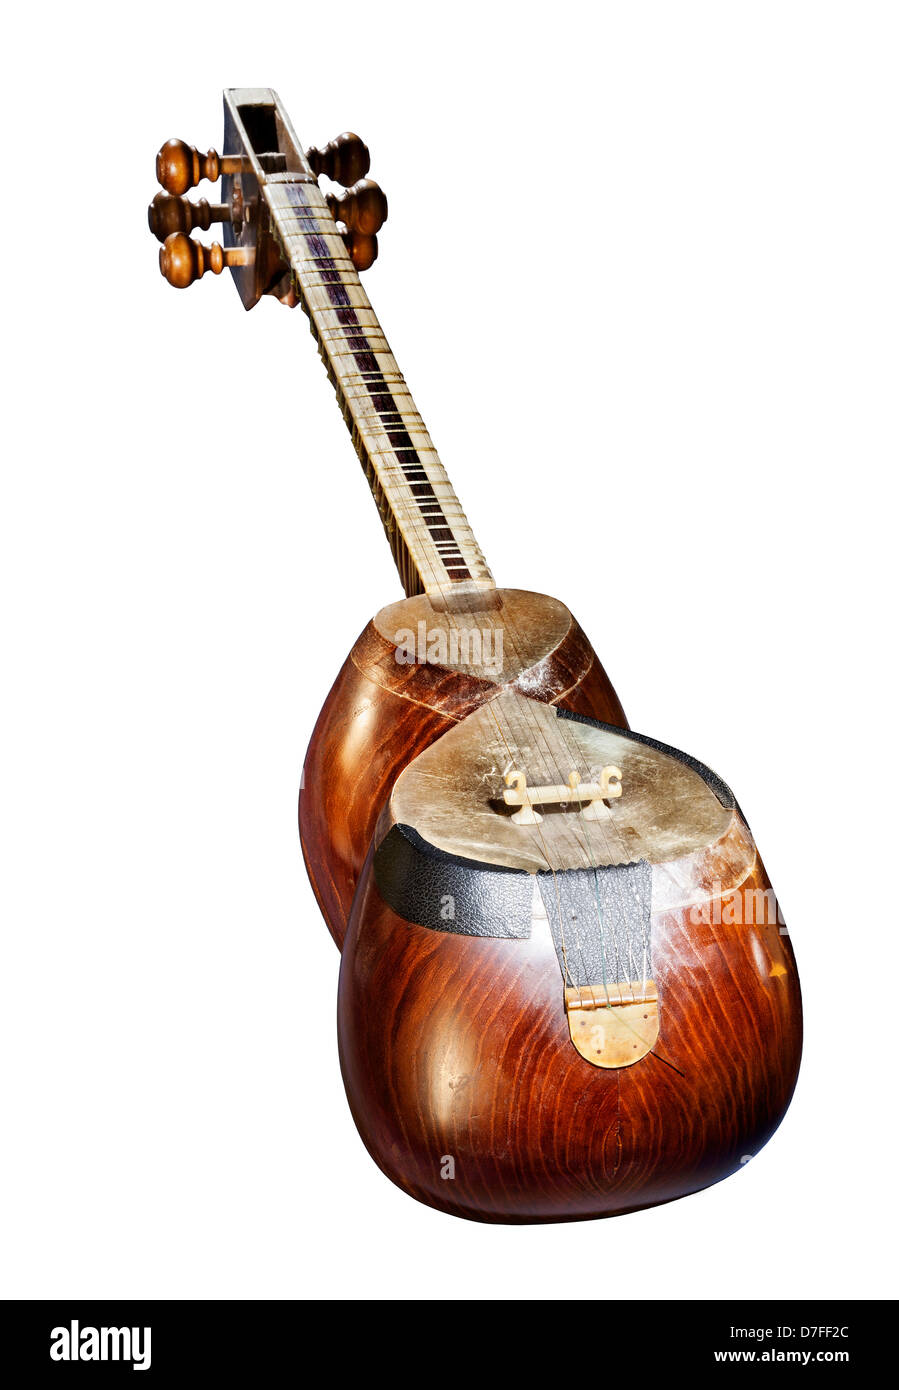 A Persian Tar musical string instrument isolated on white background. Tar is long-necked waisted lute instrument word 'tar' Stock Photo